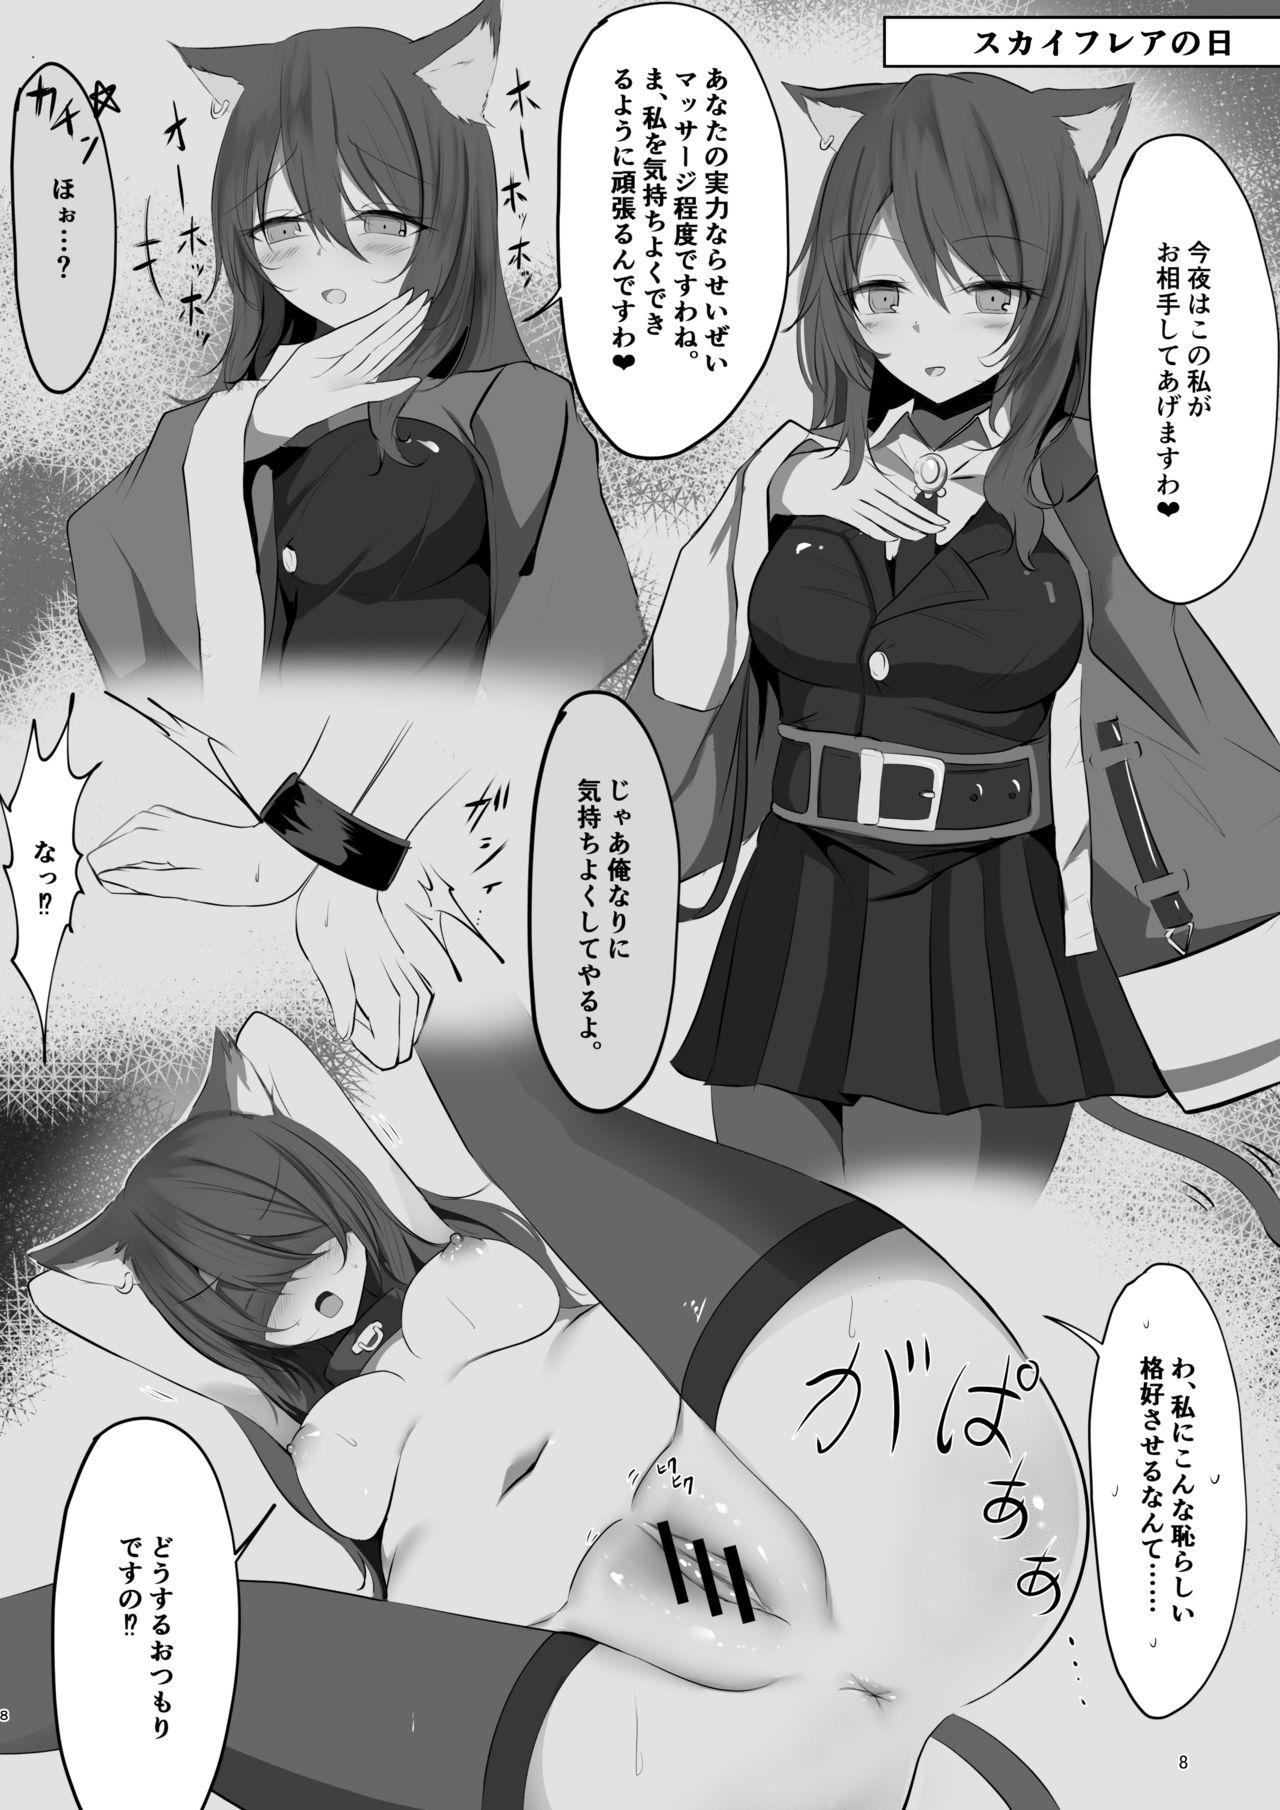 Free Amature 夜な夜な扇情作戦記録 - Arknights Gay Shaved - Page 8